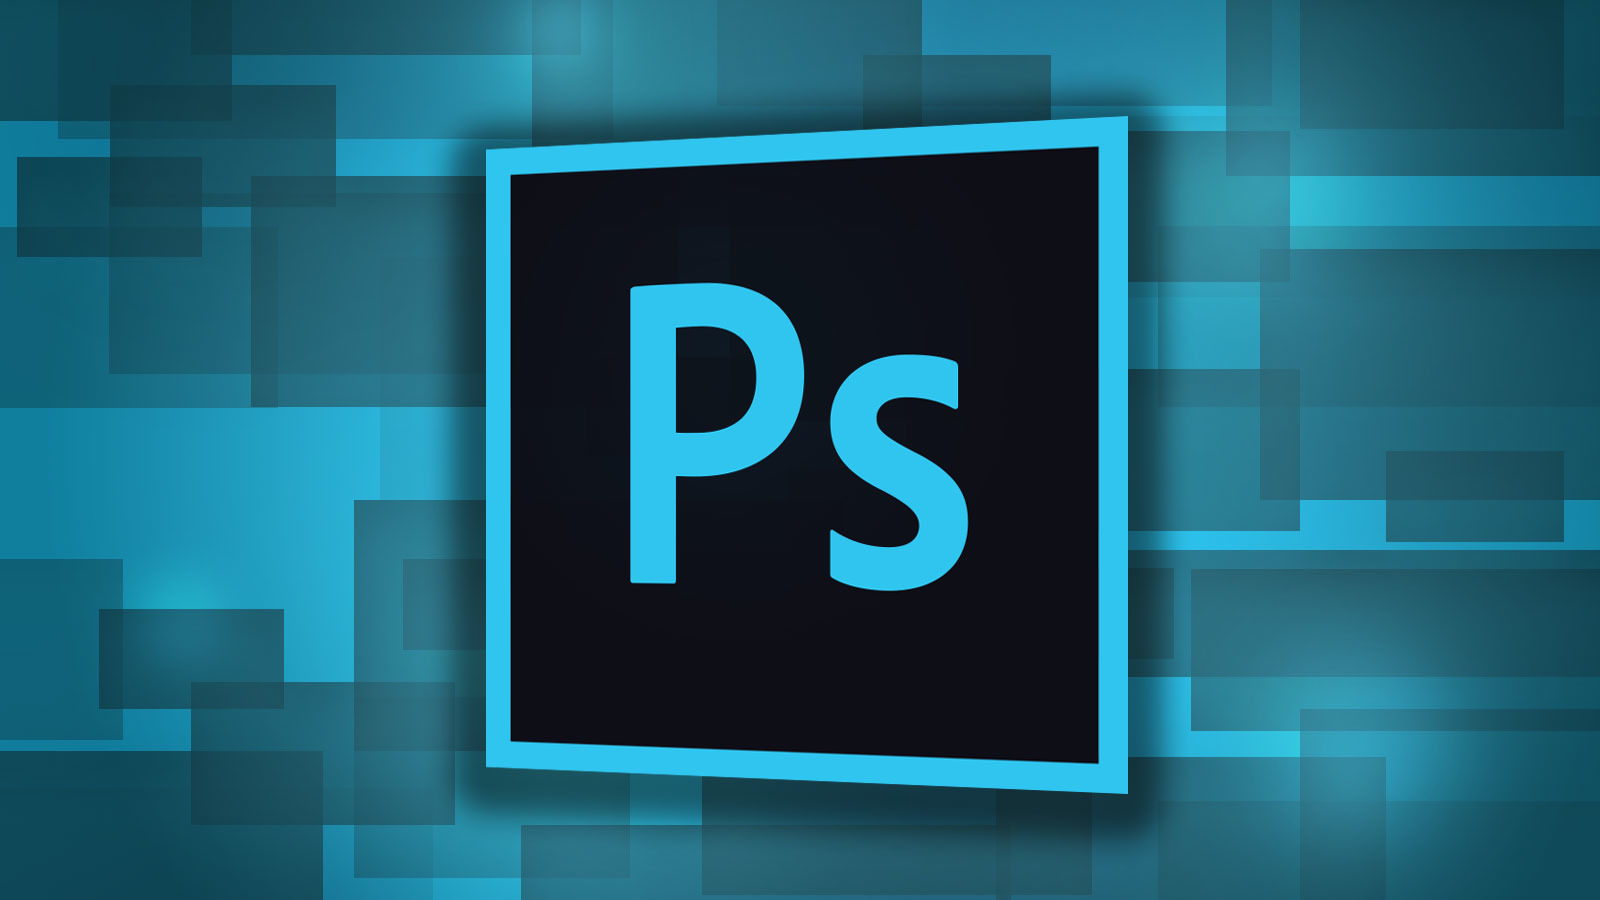 Photoshop Wallpapers